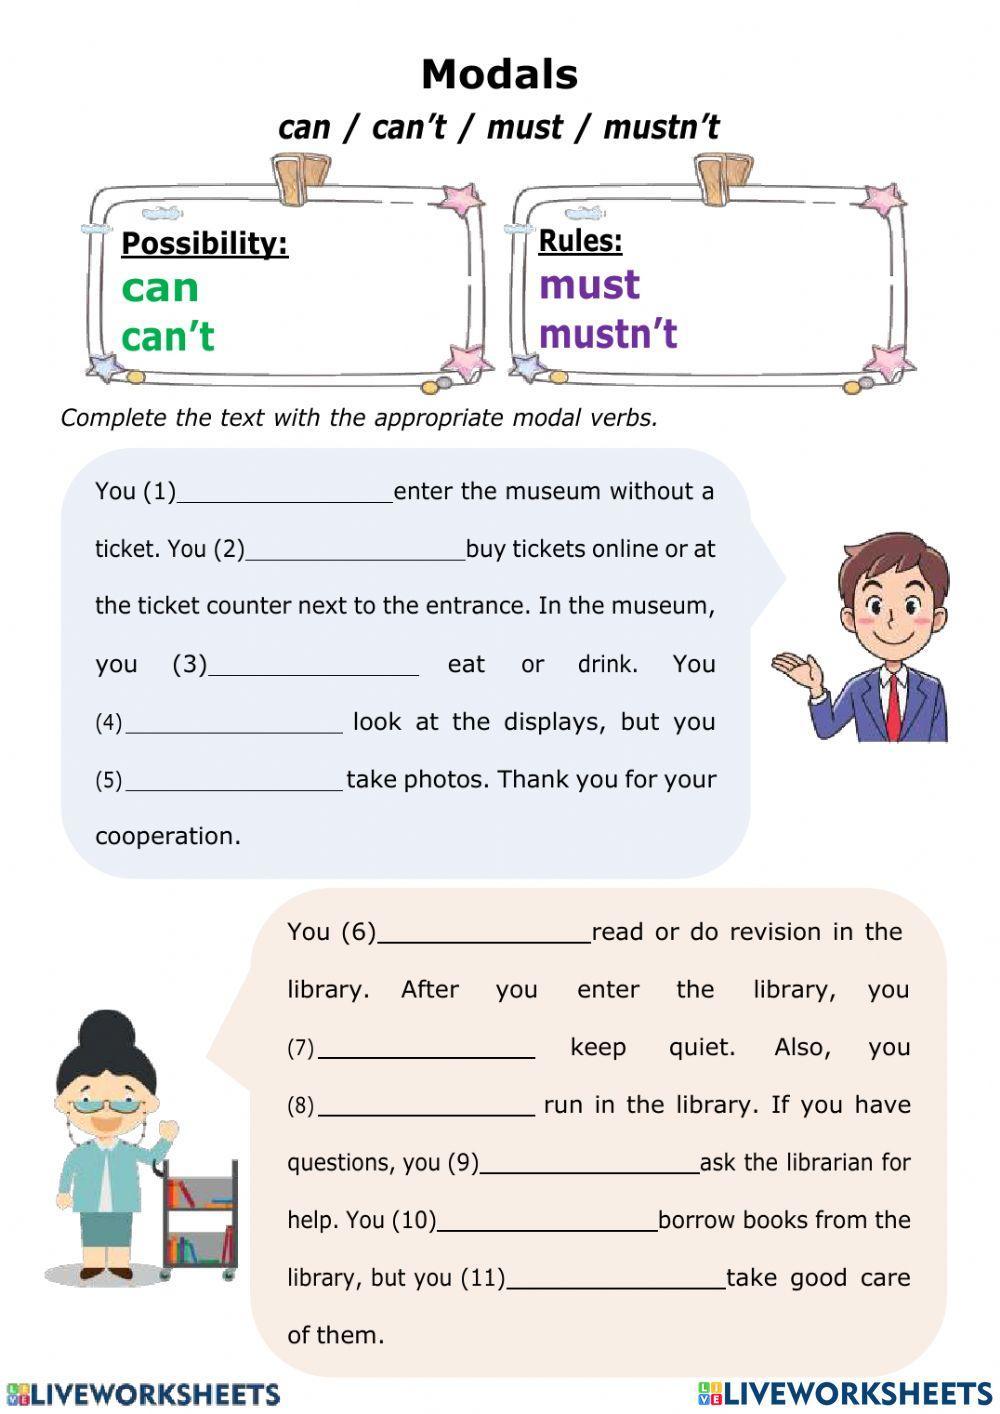 Modal verbs: can, can't, must, mustn't